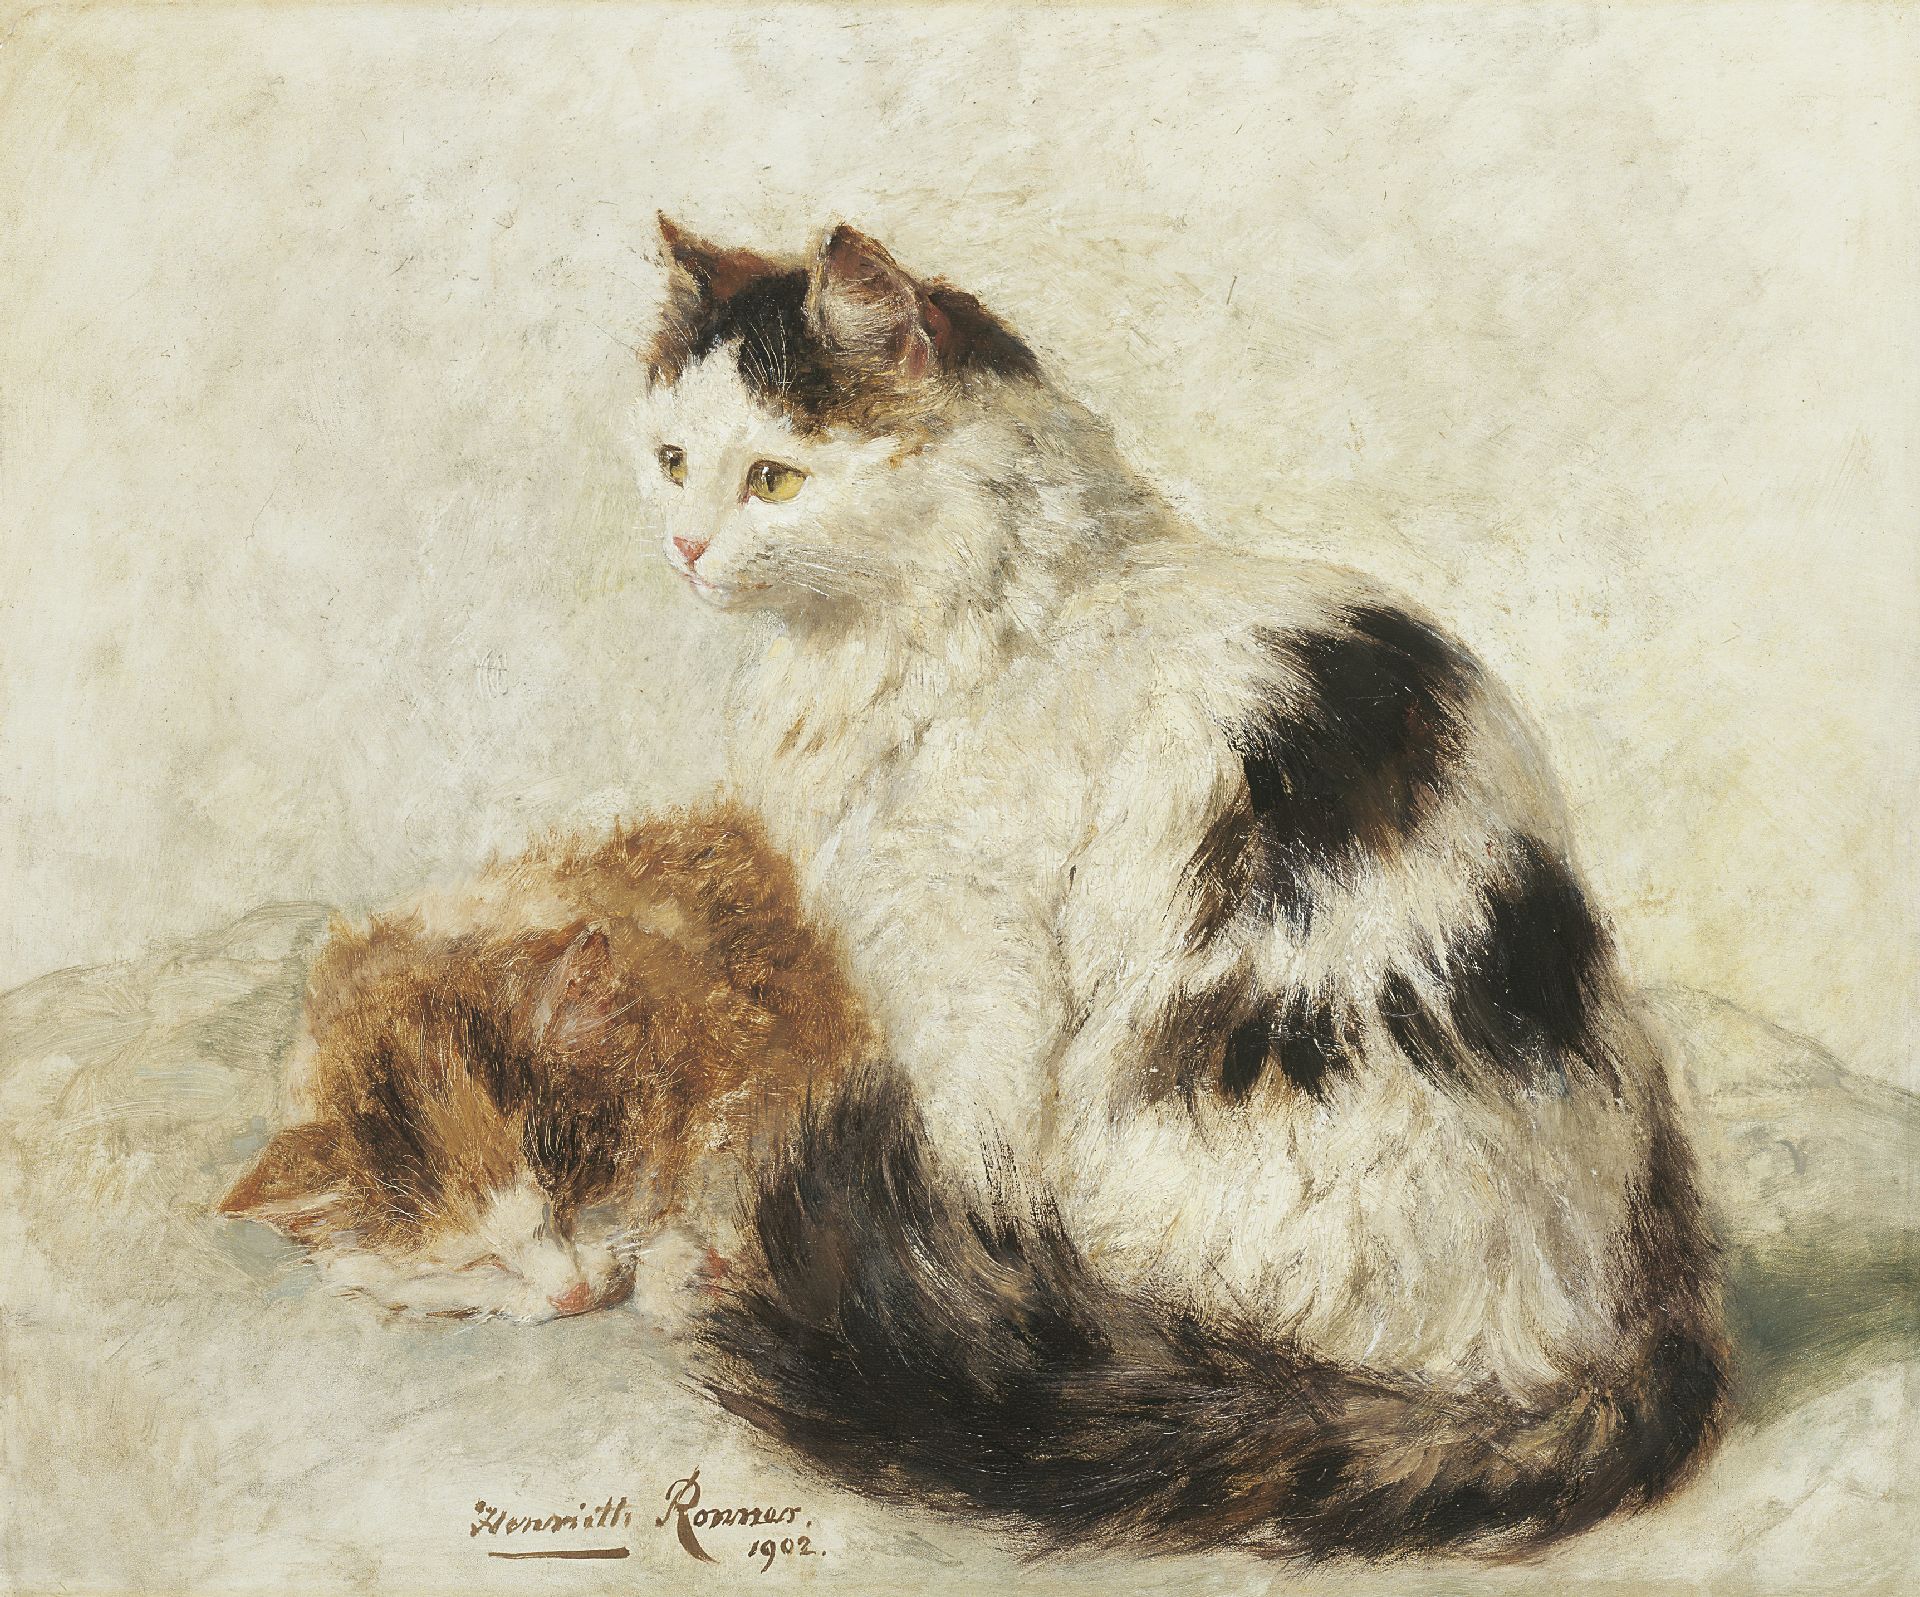 Henriette Ronner | Paintings prev. for Sale | Two cats